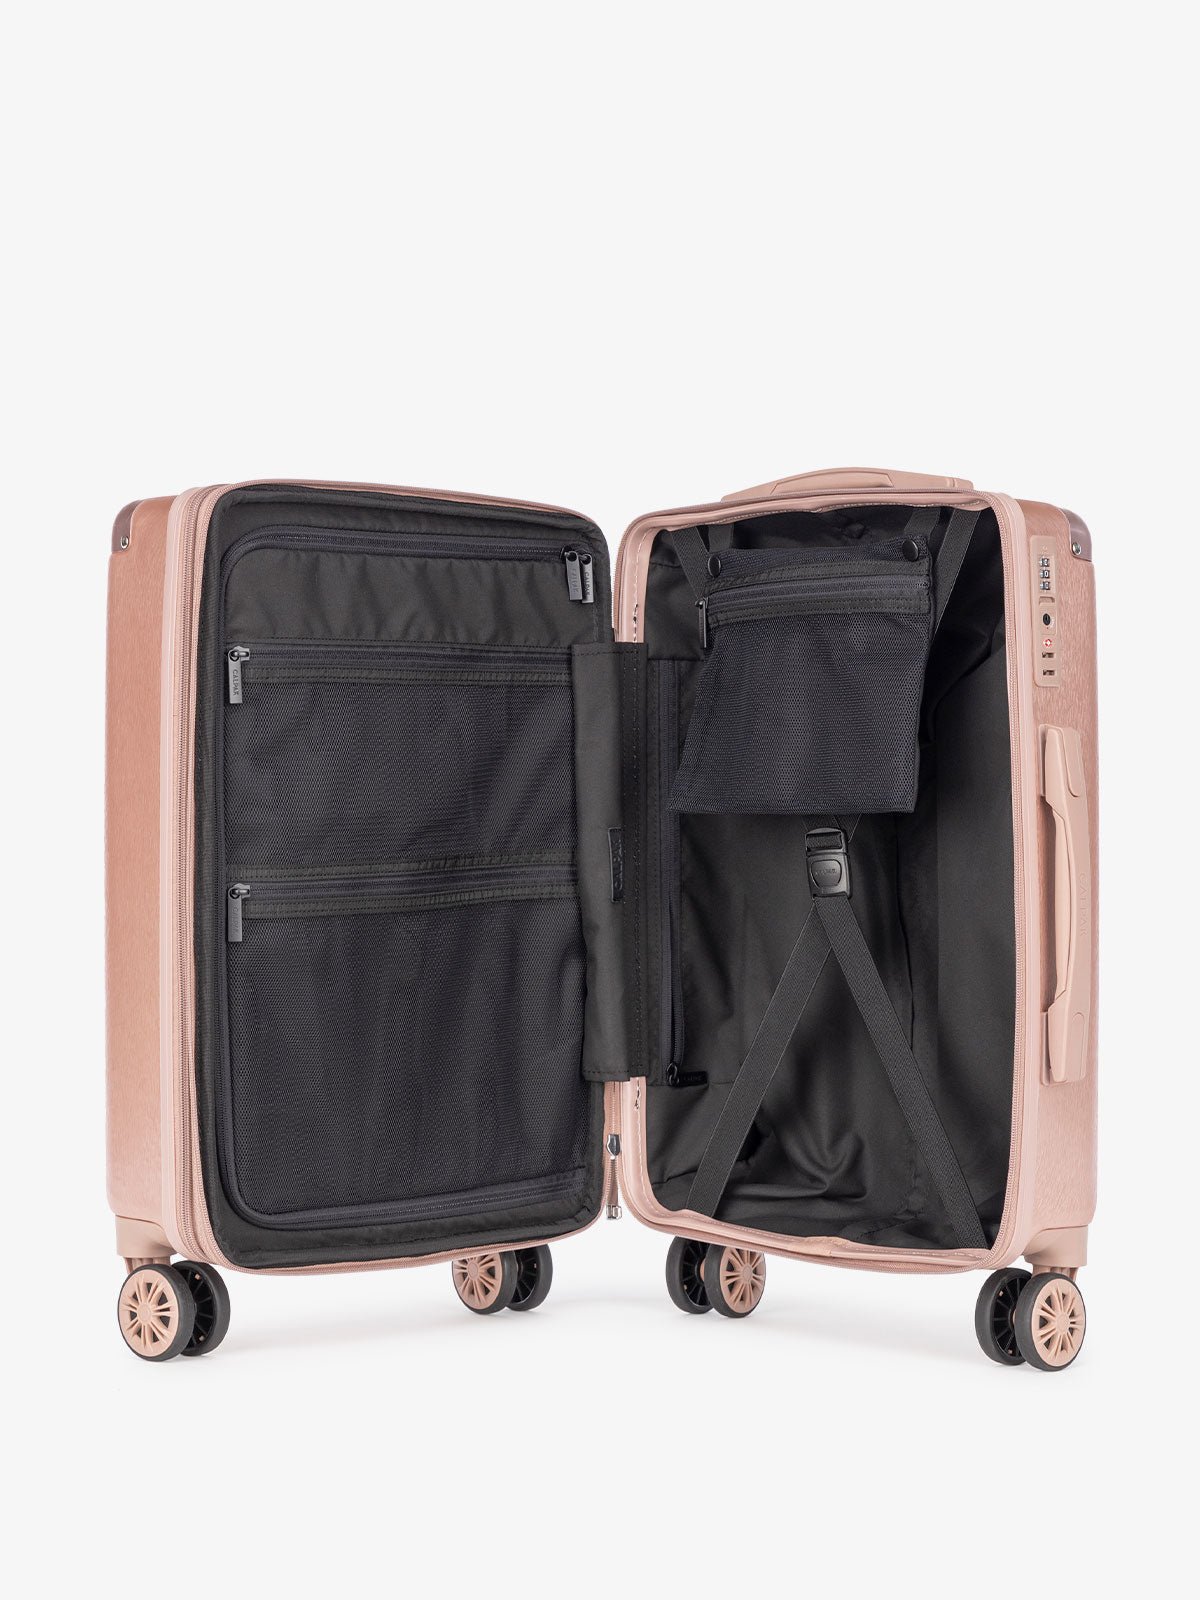 pink rose gold CALPAK Ambeur medium 26 inch hard-sided luggage with compression straps